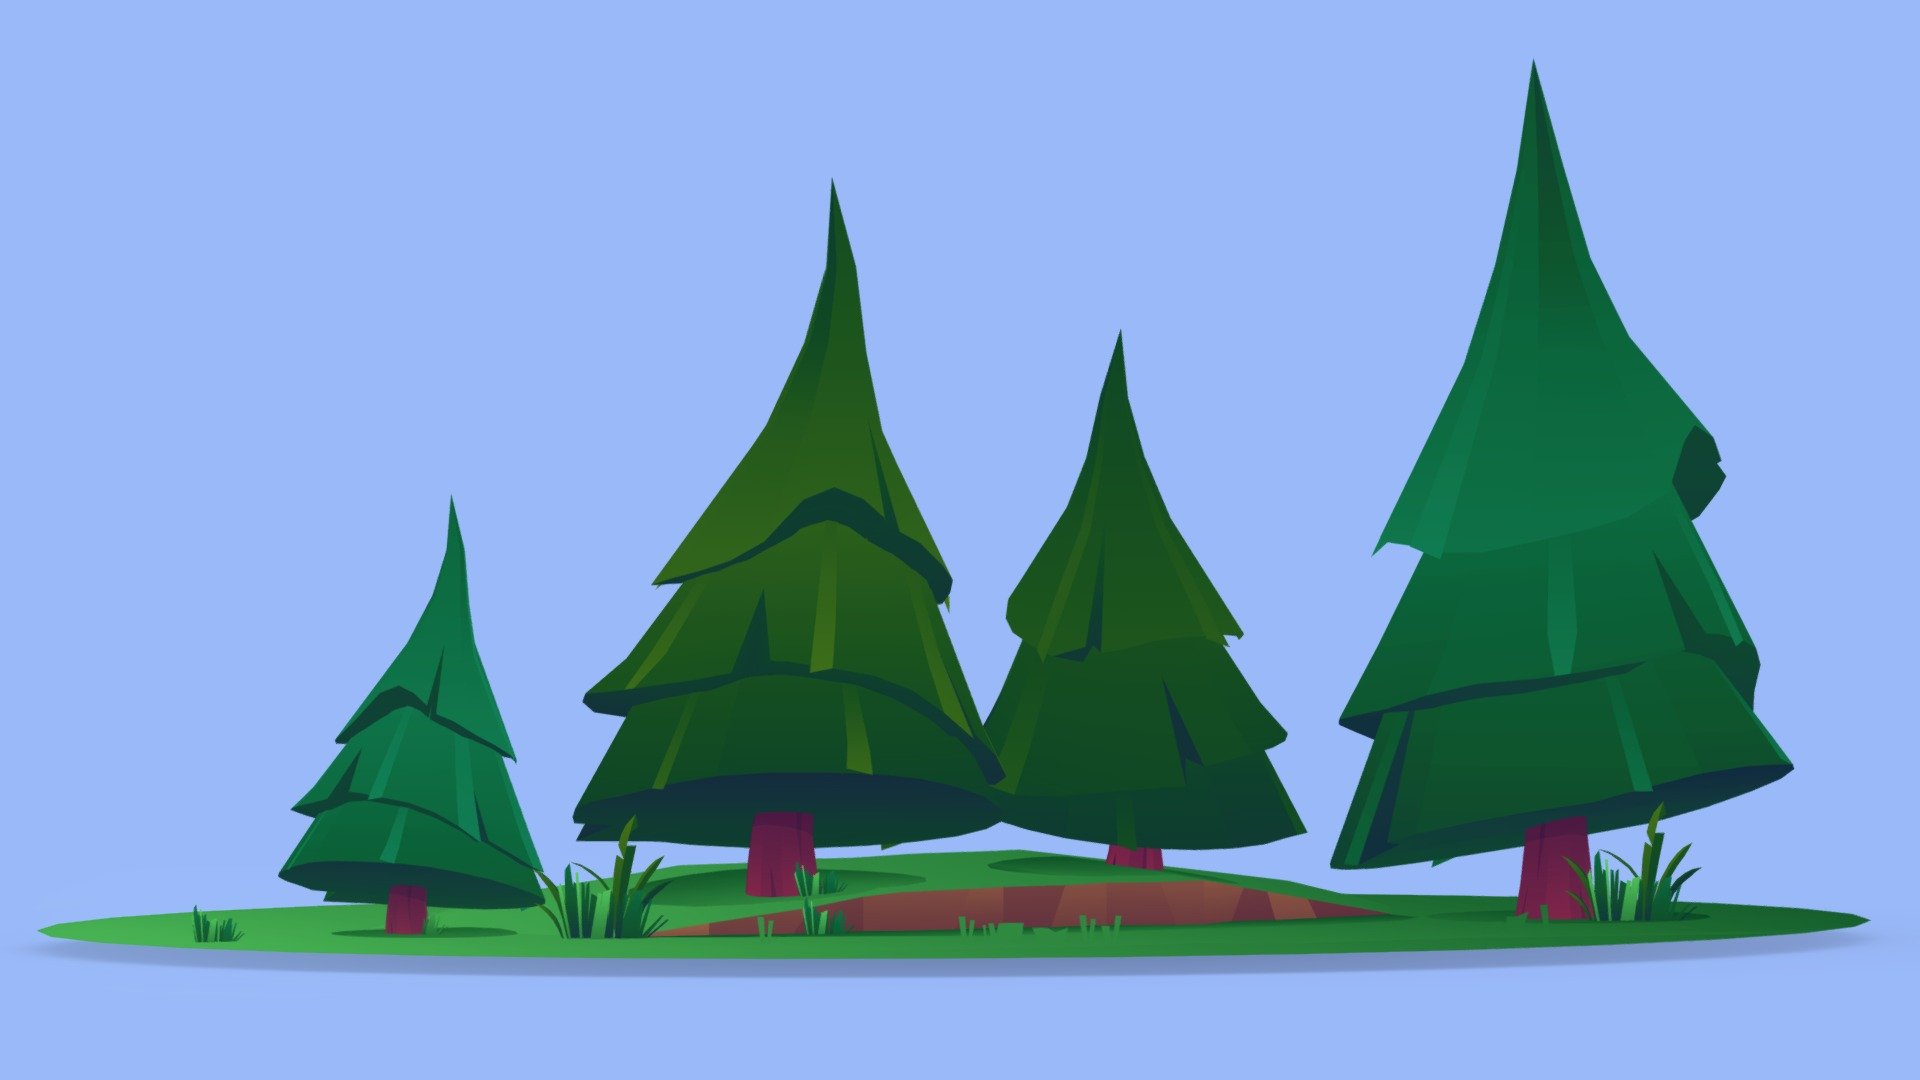 stylized unlit pine trees.

Textured with gradient atlas, so it is performant for mobile games and video games.

Like a few of my other assets
in the same style, it uses a single texture diffuse map and is mapped using only color gradients. 
All gradient textures can be extended and combined to a large atlas.

There are more assets in this style to add to your game scene or environment. Check out my sale.

If you want to change the colors of the assets, you just need to move the UVs on the atlas to a different gradient.
Or contact me for changes, for a small fee.

**I also accept freelance jobs. Do not hesitate to write me. **

*-------------Terms of Use--------------

Commercial use of the assets  provided is permitted but cannot be included in an asset pack or sold at any sort of asset/resource marketplace.* - stylized unlit pine trees - Buy Royalty Free 3D model by Stylized Box (@Stylized_Box) 3d model